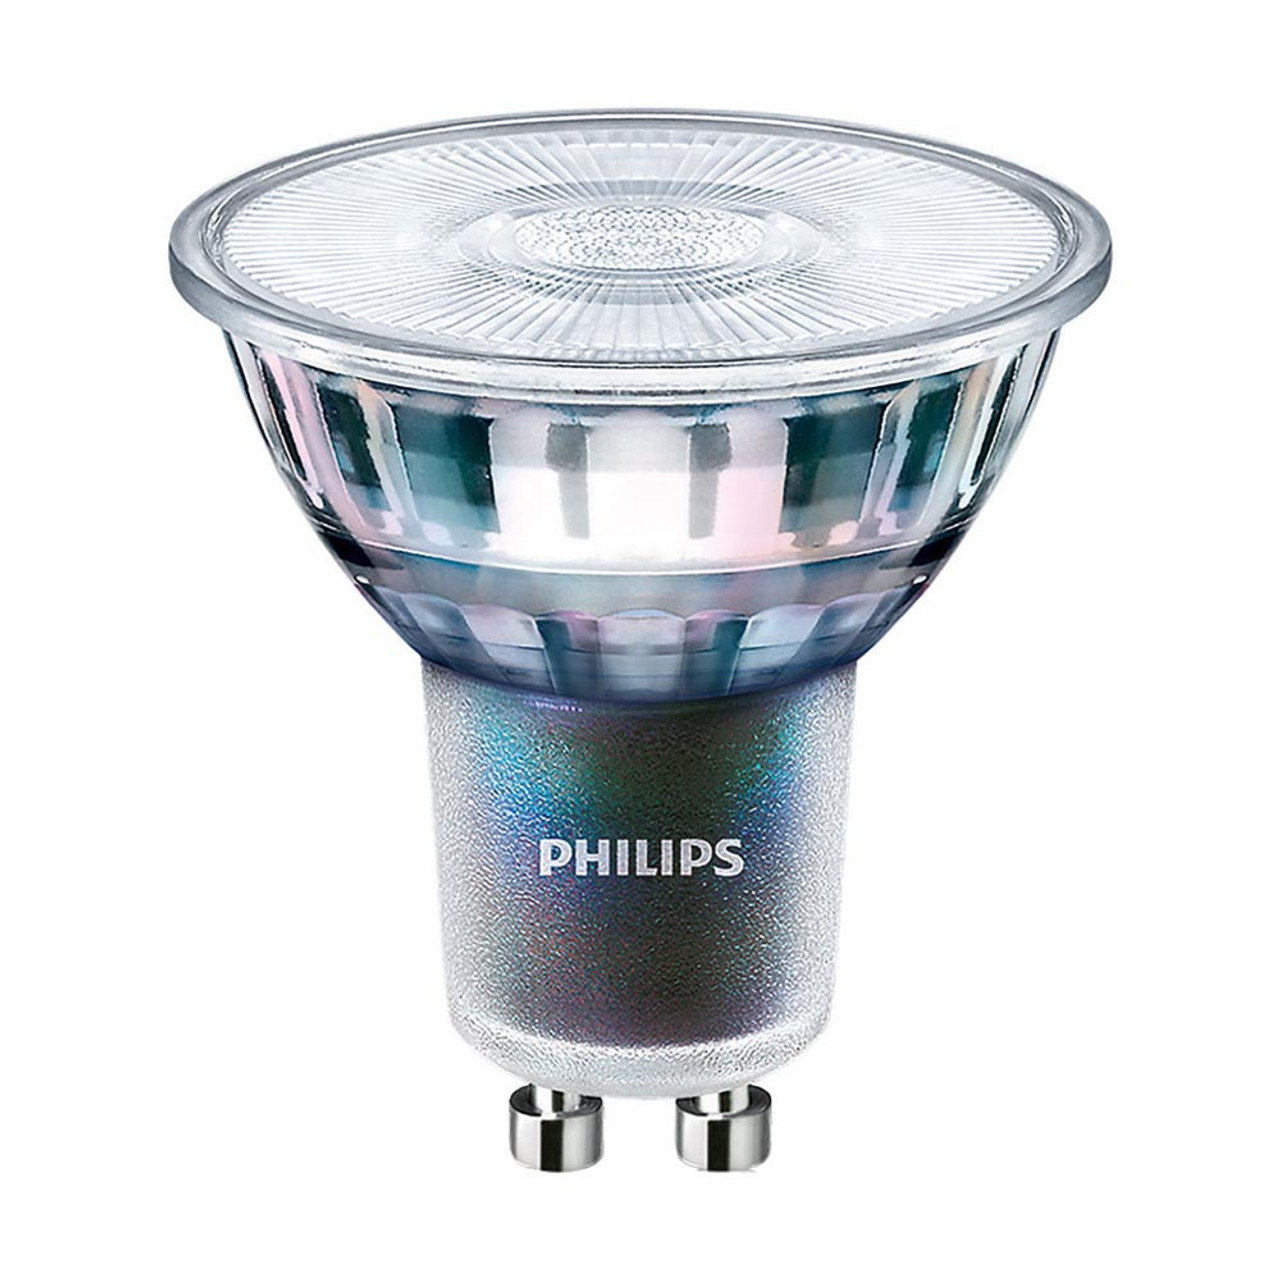 Philips Master LED GU10 240V 5.5W Cool White 25 Degrees Dimmable